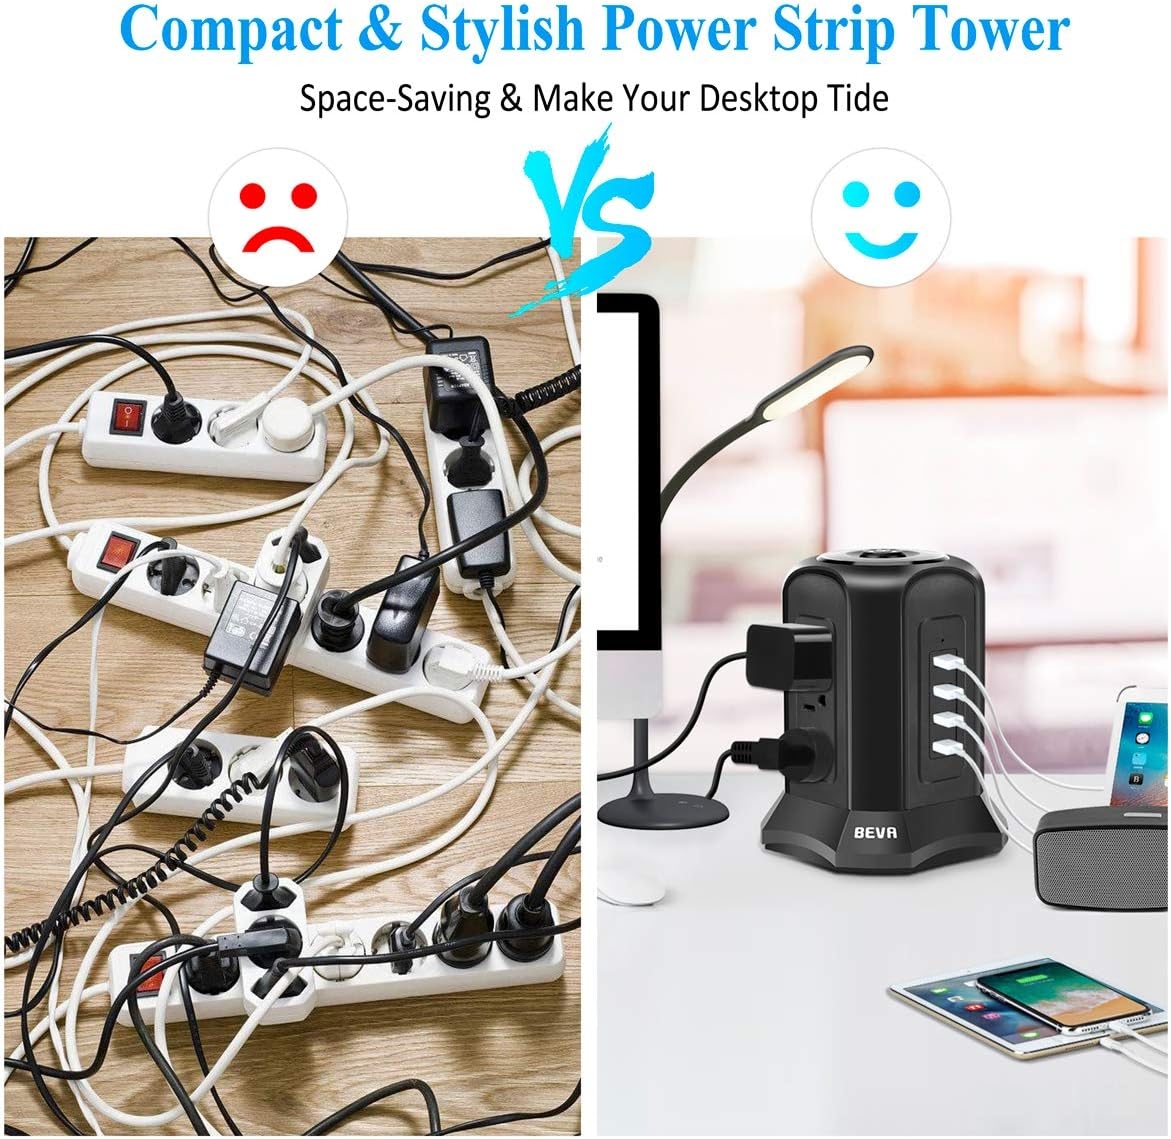 Surge Protector Power Strip Tower - BEVA Desktop Power Strip Tower with 4 USB Ports 9 Outlets,Switch Control Power Outlet Strips Charging Station 6 ft Extension Cable for Office and Home